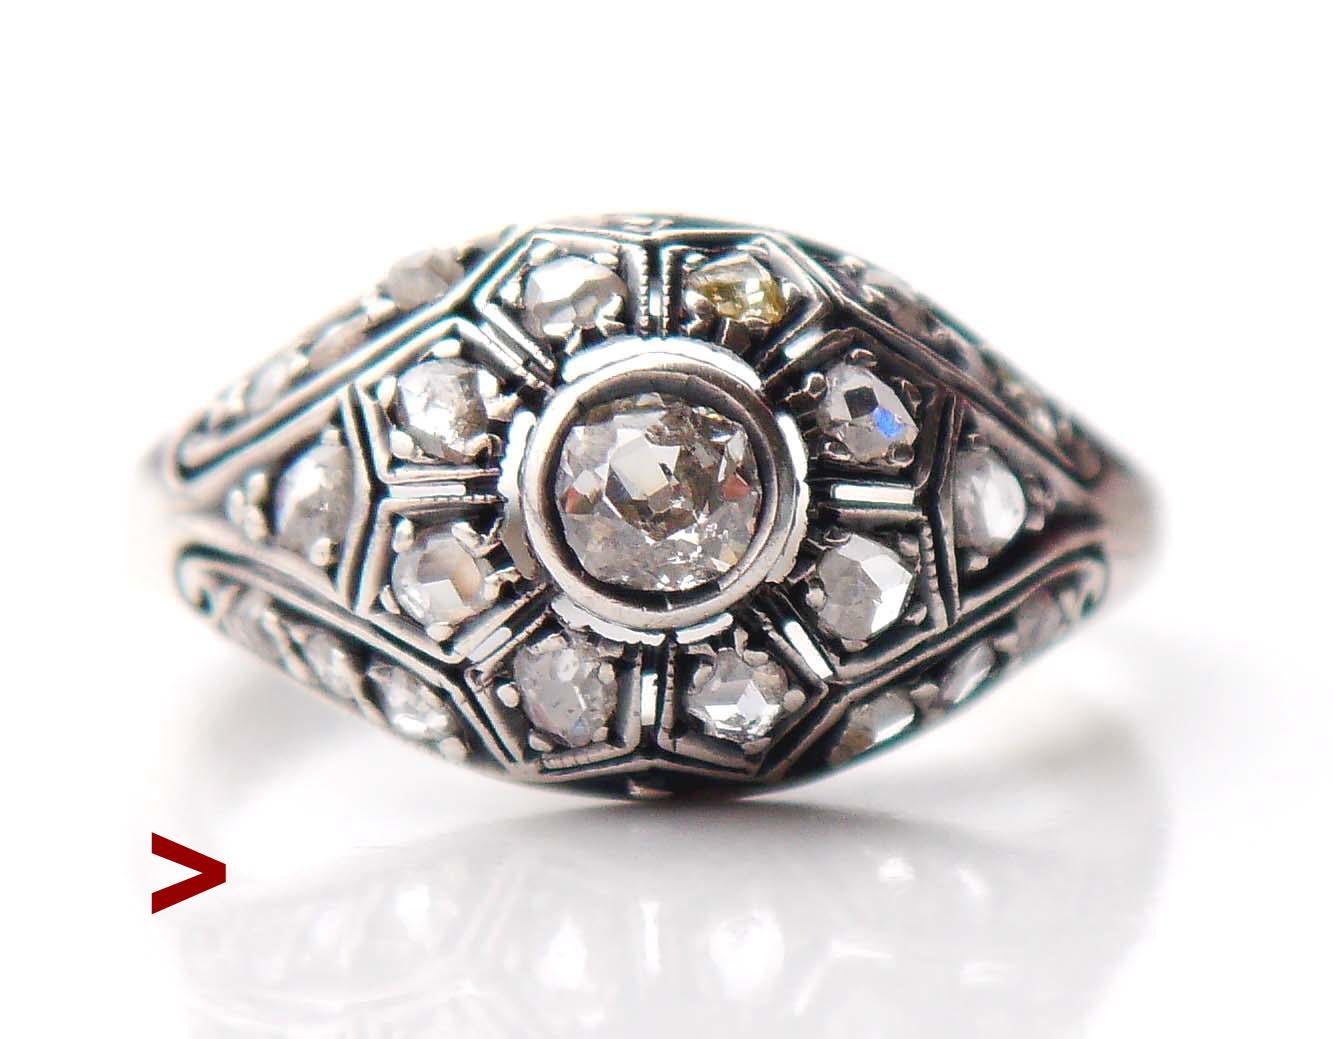 Unusual Antique Diamond ring with all metal parts in solid Silver. Very likely Russian made, I got it together with many Russian made items that date to late Imperial period.

Not hallmarked, made ca. late XIX - early XX century. Crown 16 mm x 10 mm